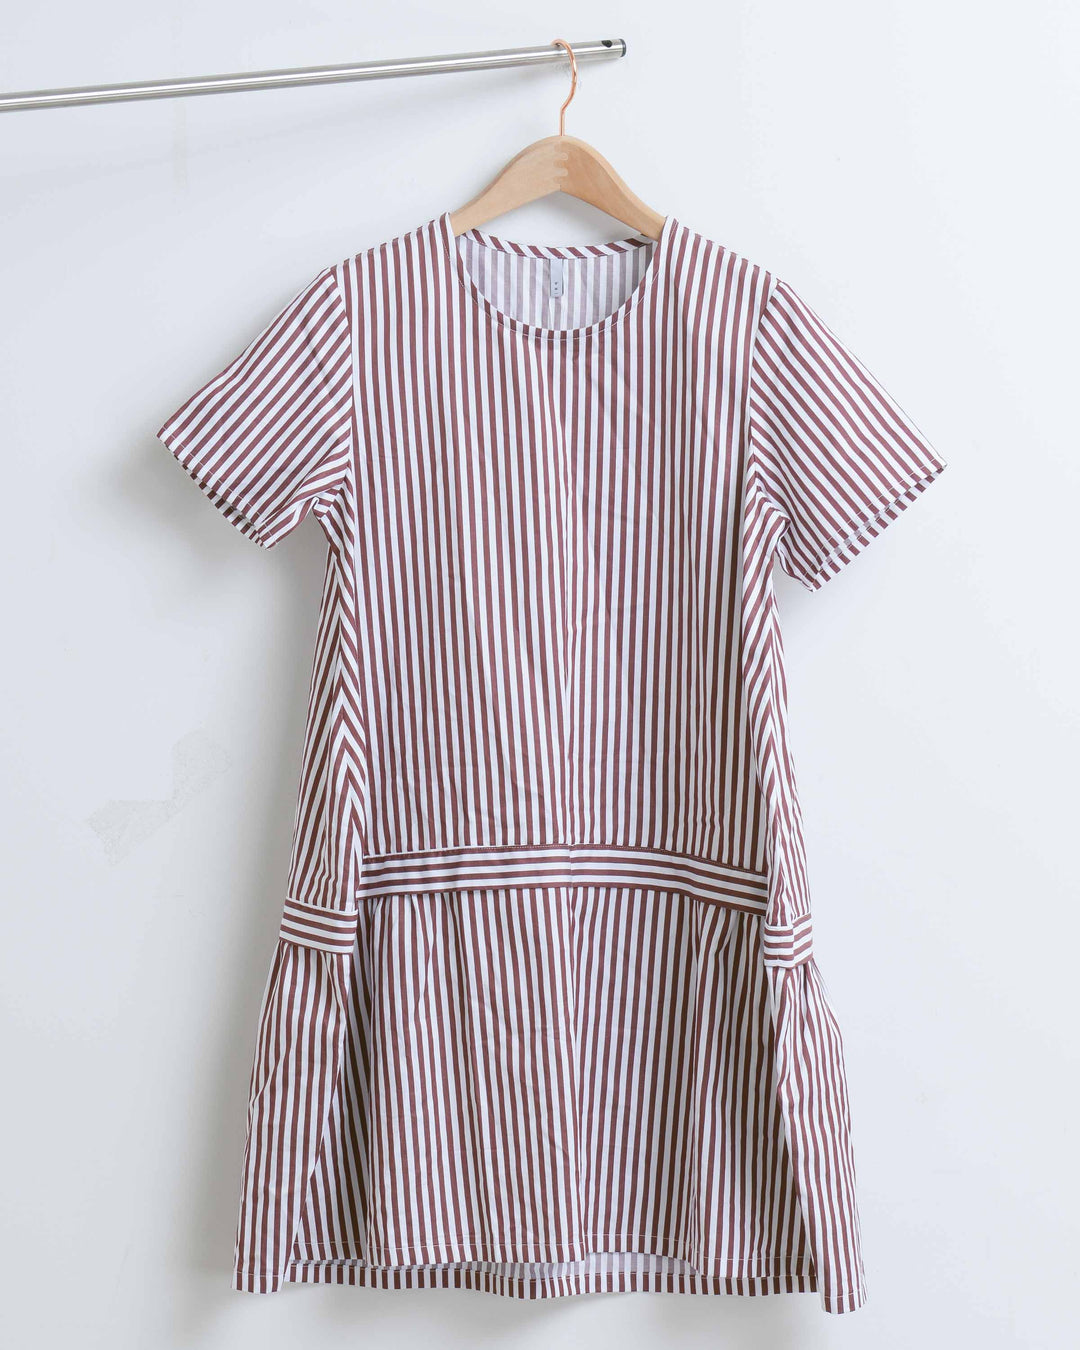 maroon and white striped dress